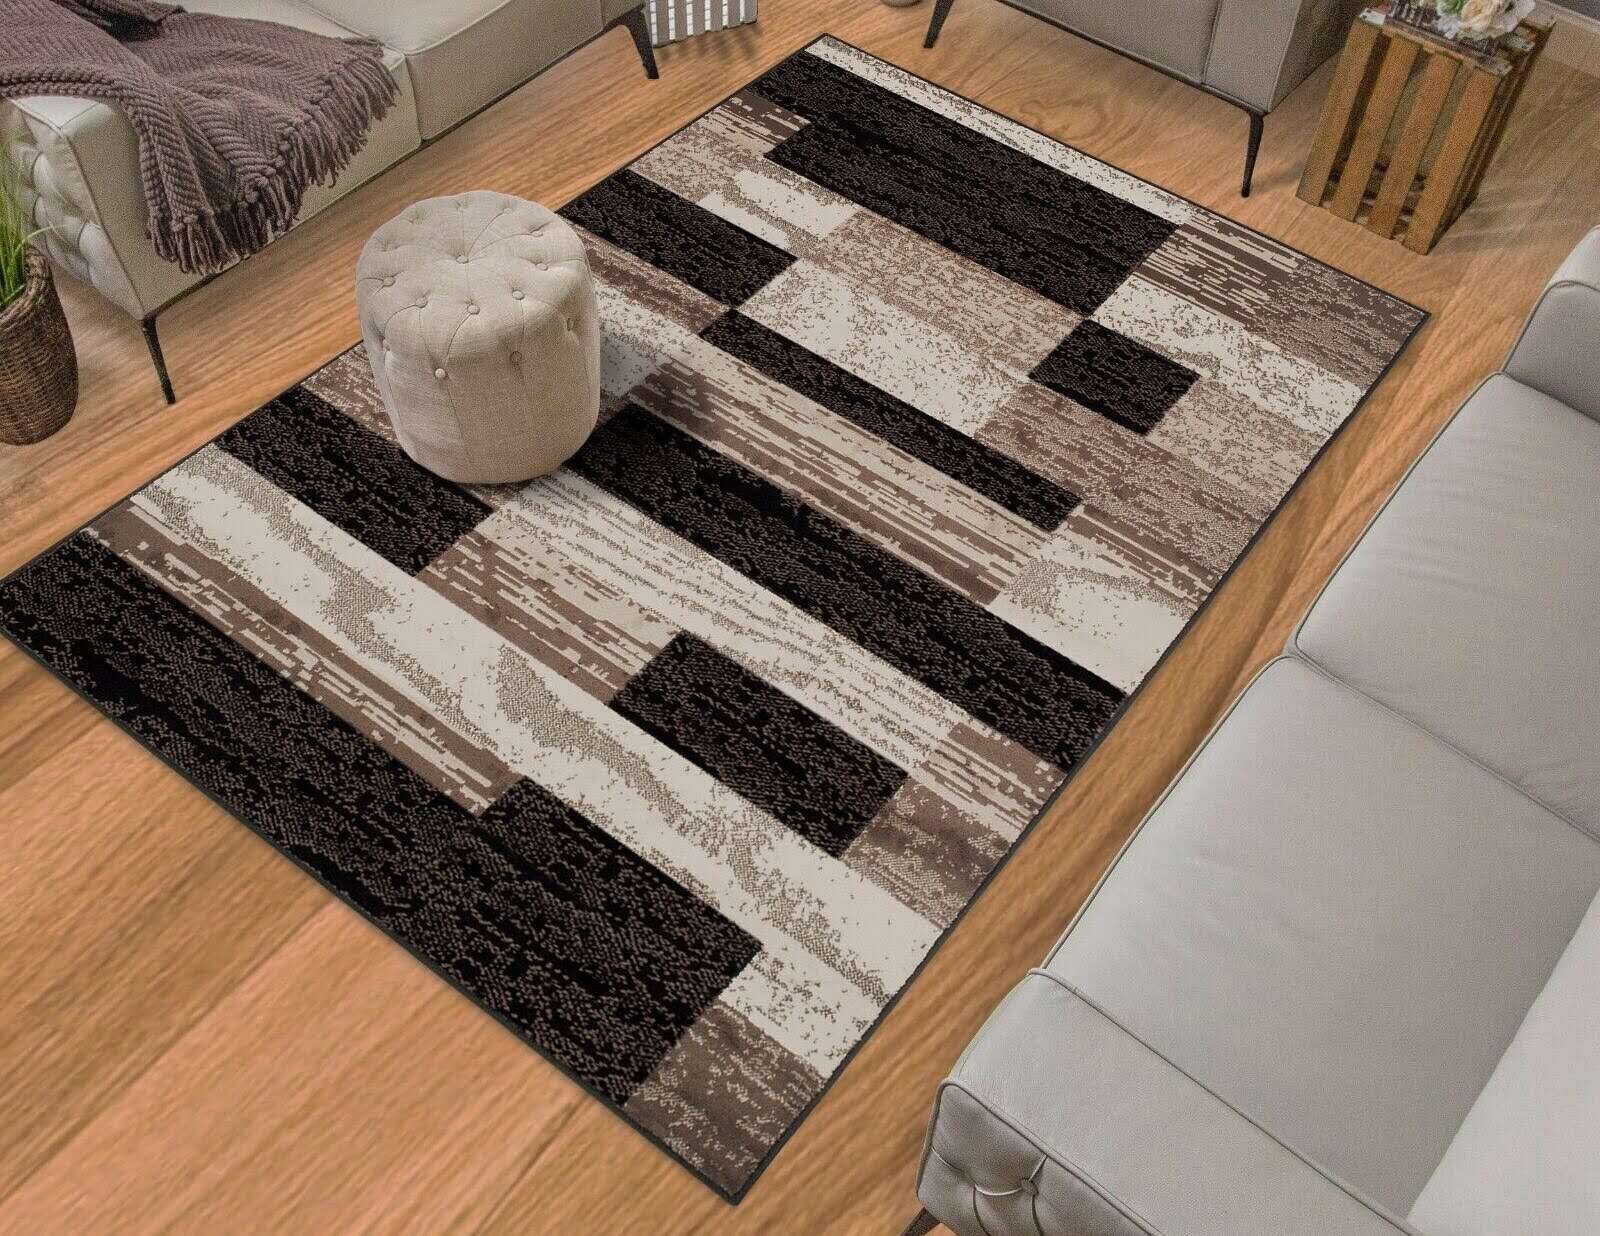 Lahome Washable Rugs 3x5 Entryway Rugs Indoor Geometric Bathroom Rugs Non  Slip, Farmhouse Tribal Soft Rubber Backing Printed Indoor Throw Carpet for